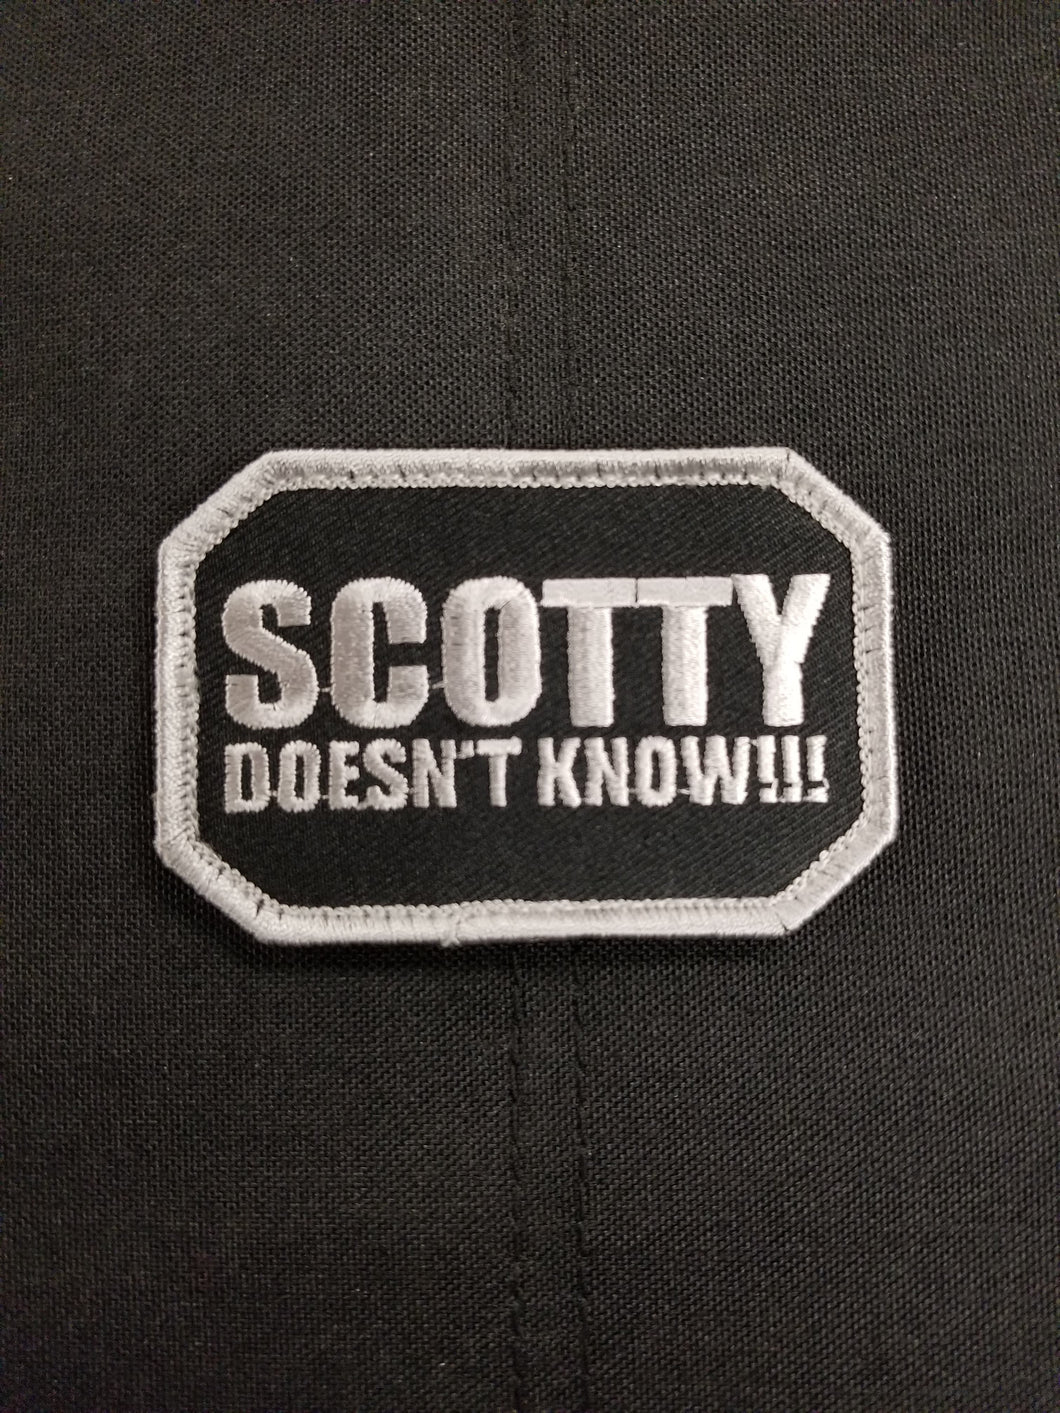 Scotty Doesn't Know!!!